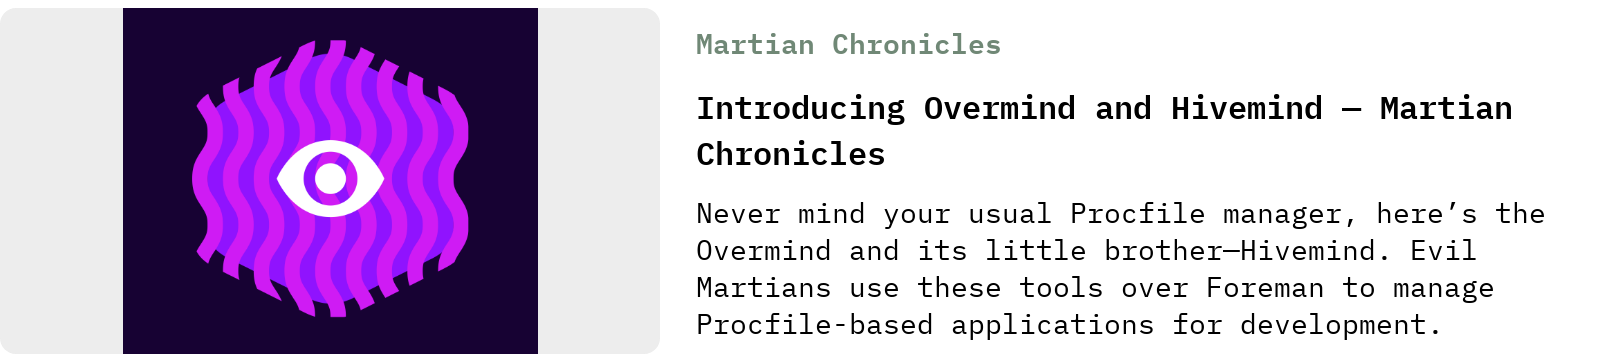 From Martian Chronicles: Introducing Overmind and Hivemind — Martian Chronicles | Never mind your usual Procfile manager, here’s the Overmind and its little brother—Hivemind. Evil Martians use these tools over Foreman to manage Procfile-based applications for development.